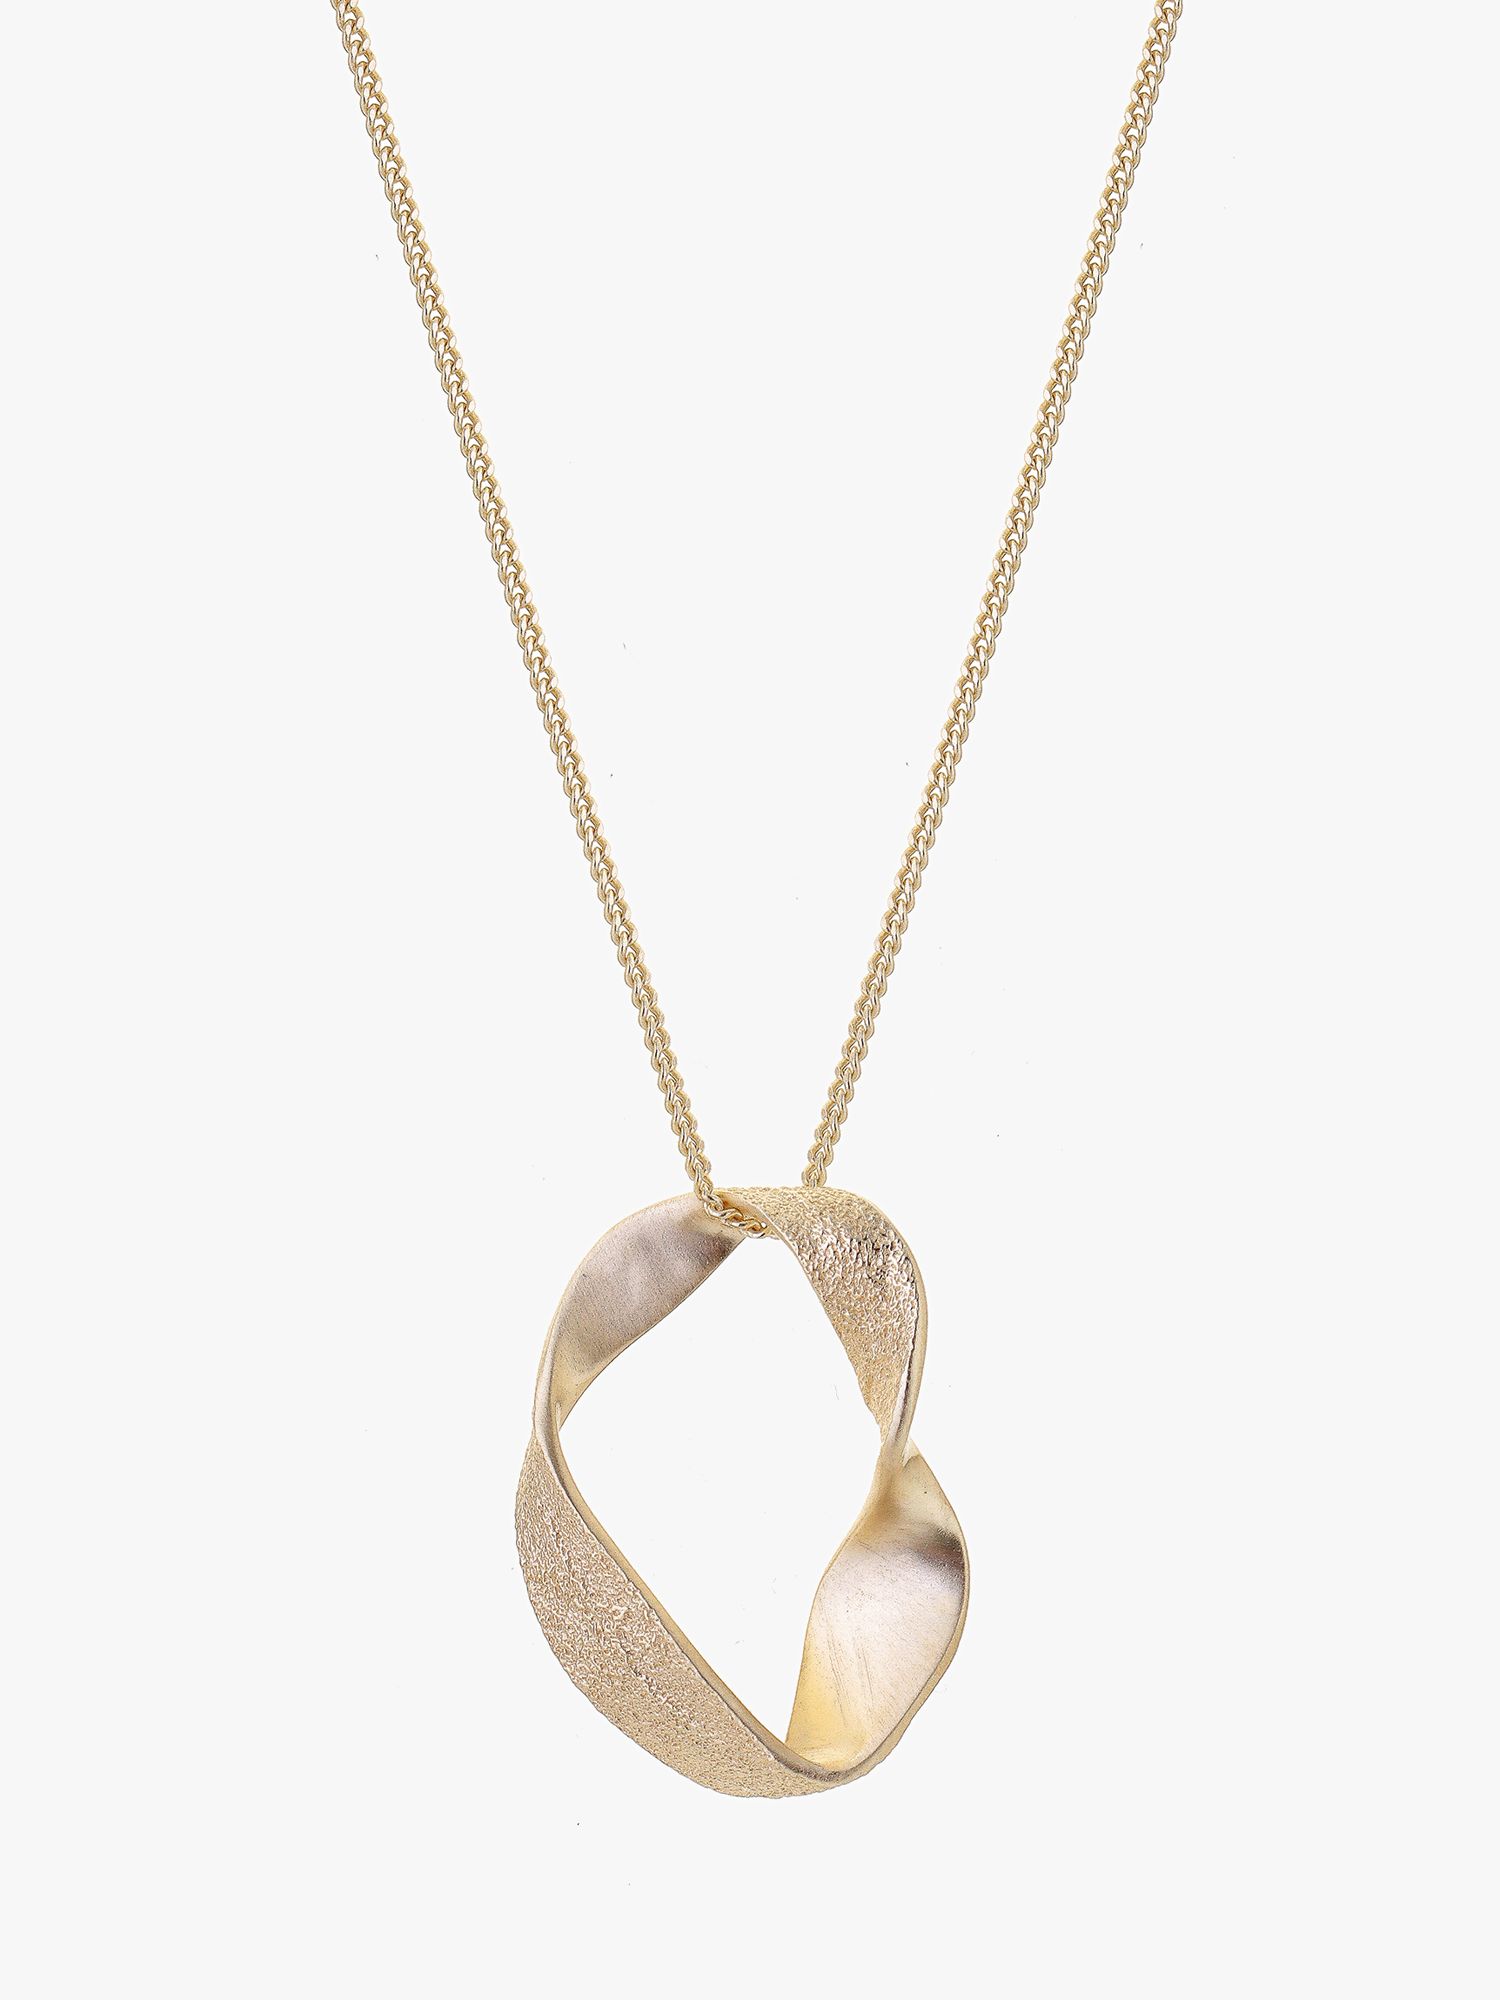 Tutti & Co Softly Twisted Pendant Necklace, Gold at John Lewis & Partners